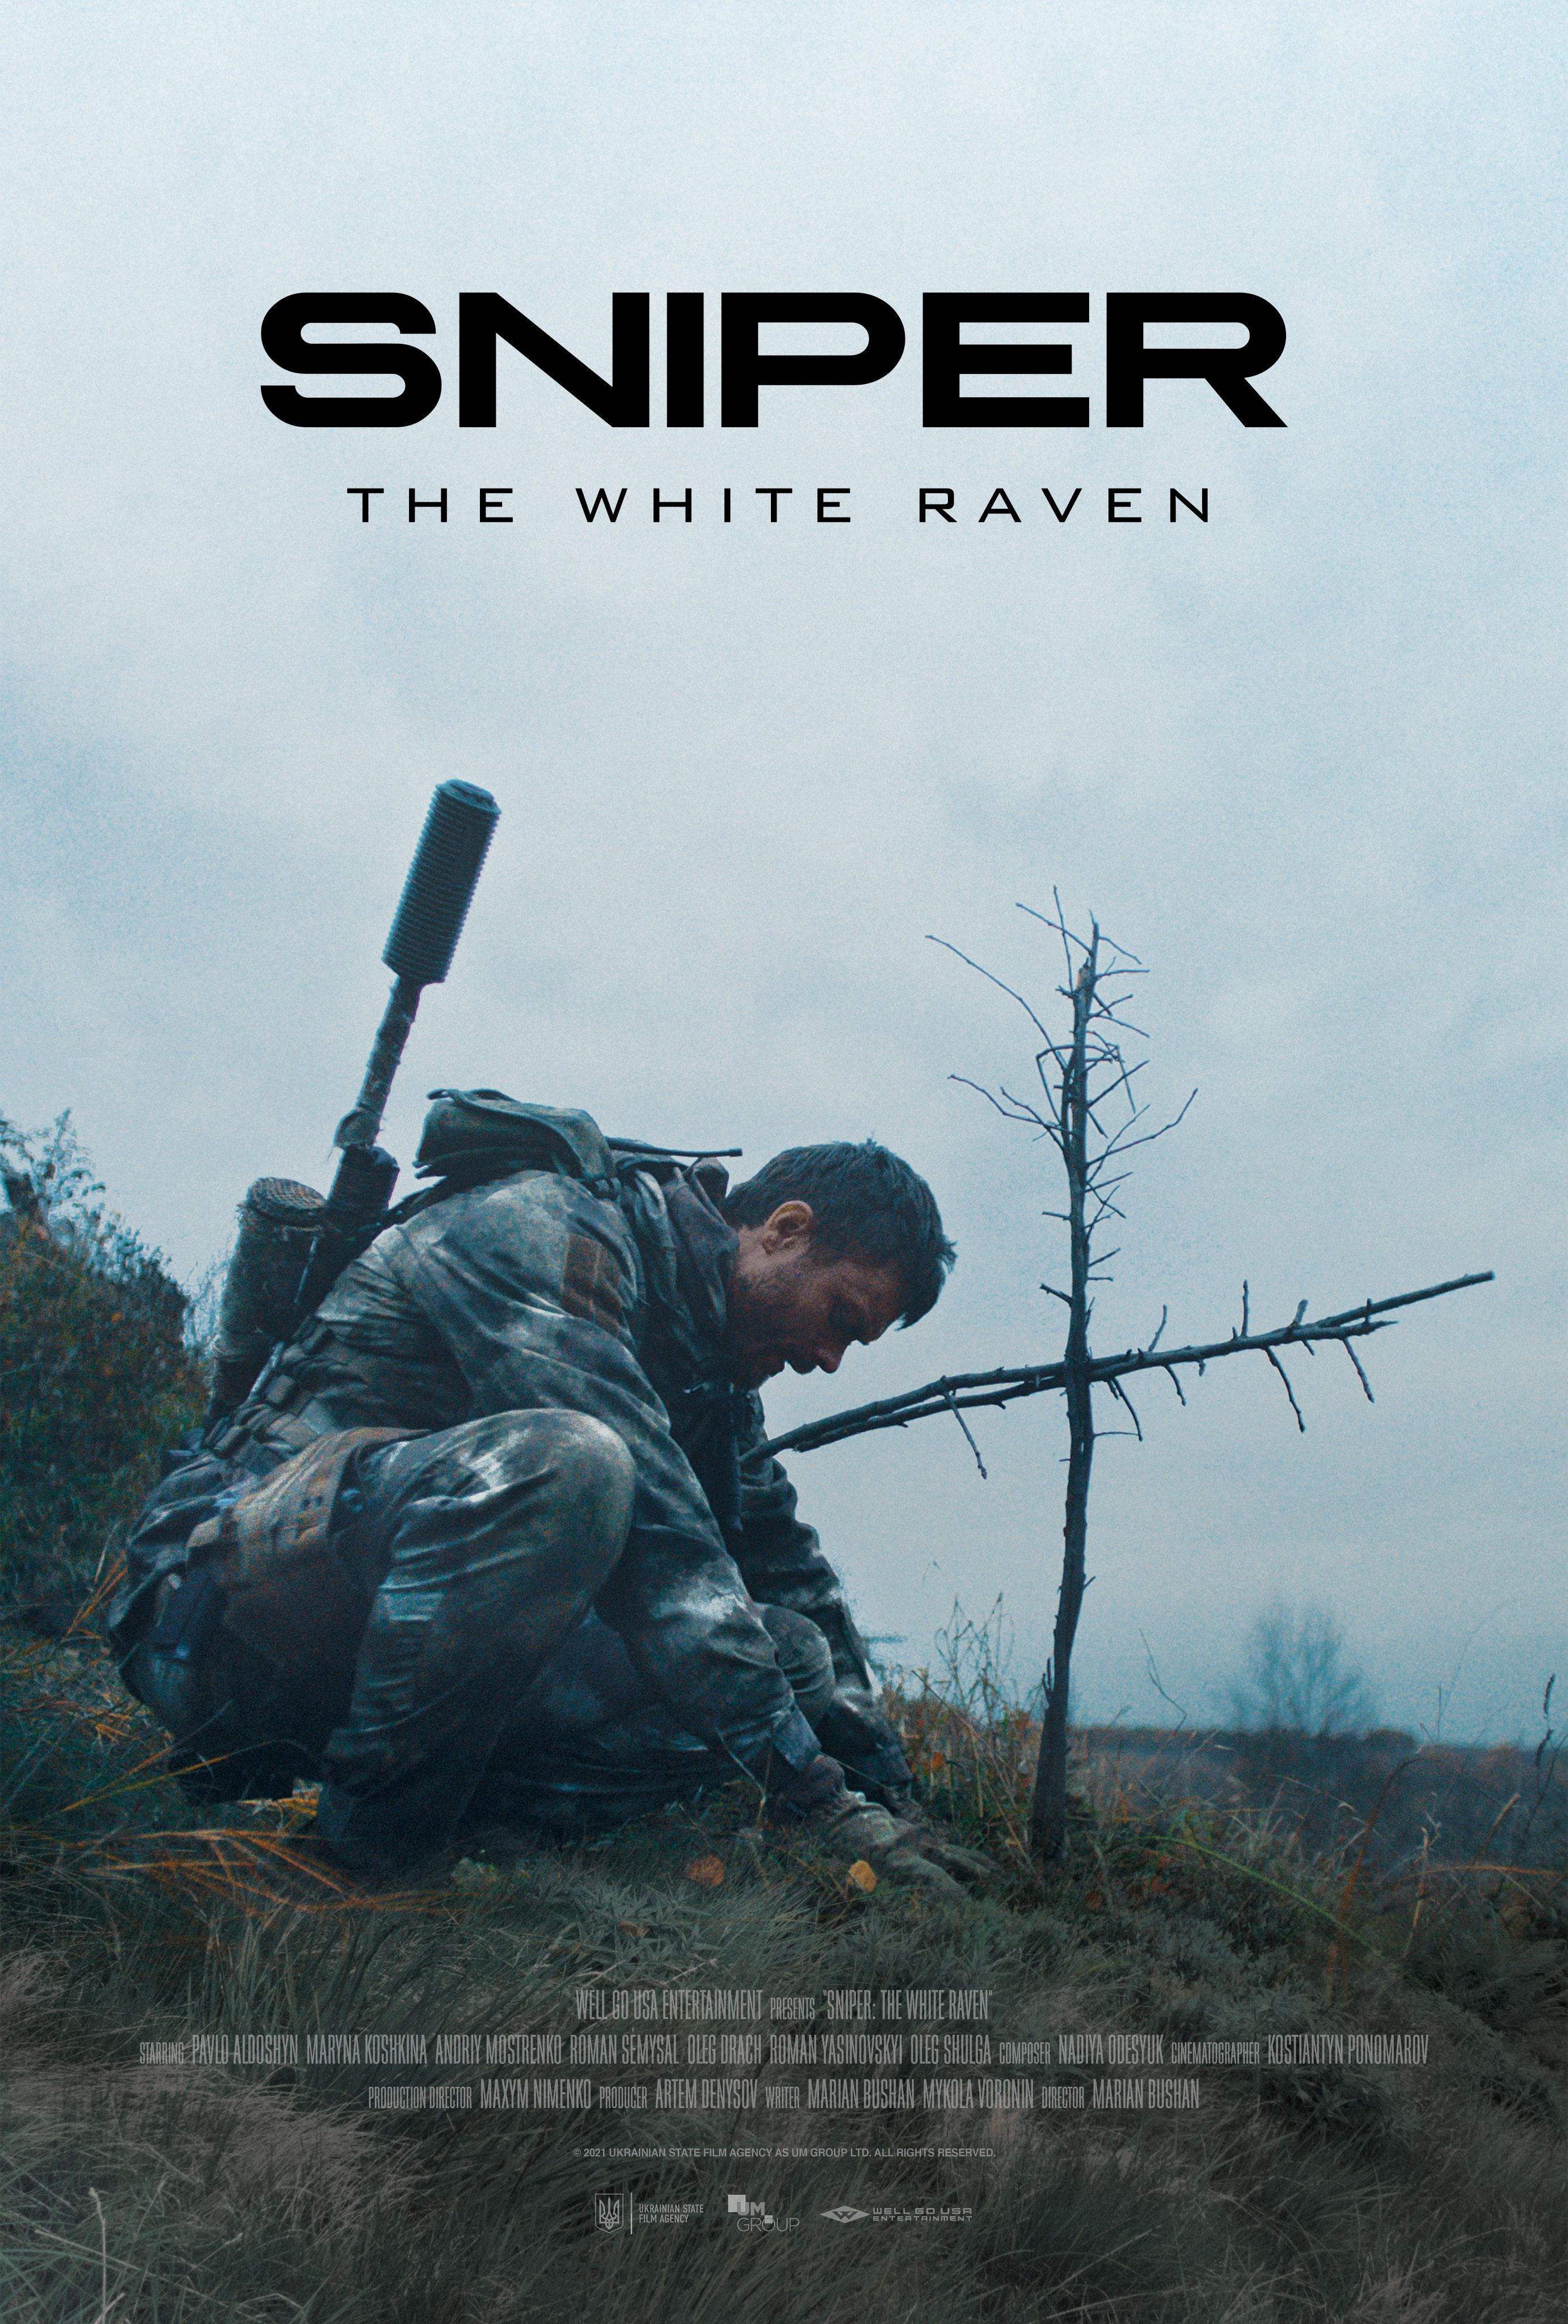 Sniper: The White Raven Trailer Revealed [EXCLUSIVE]